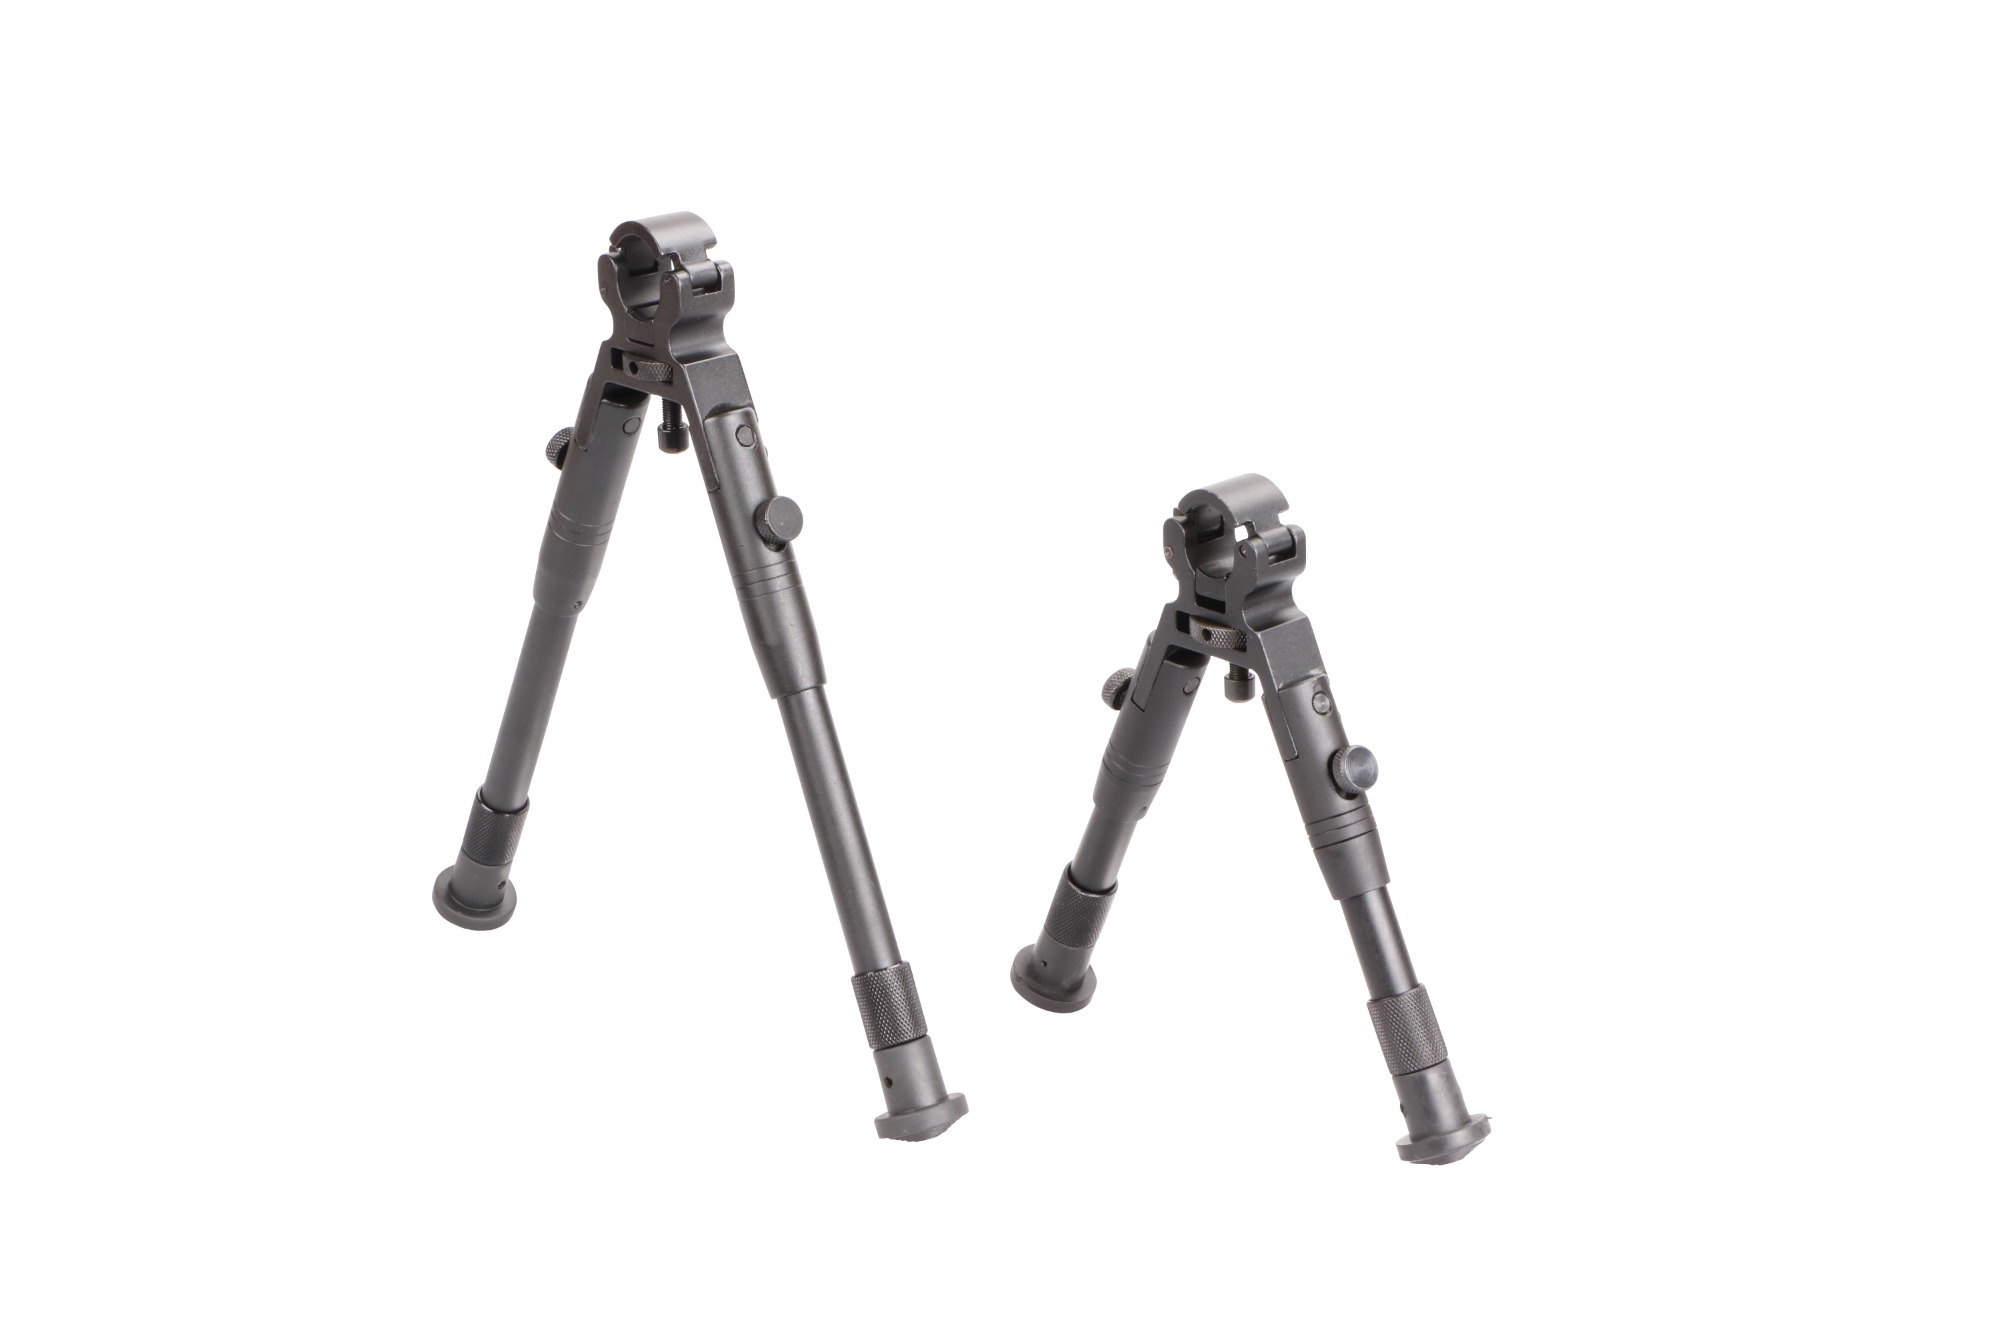 How To Choose The Right Bipod For Your Rifle